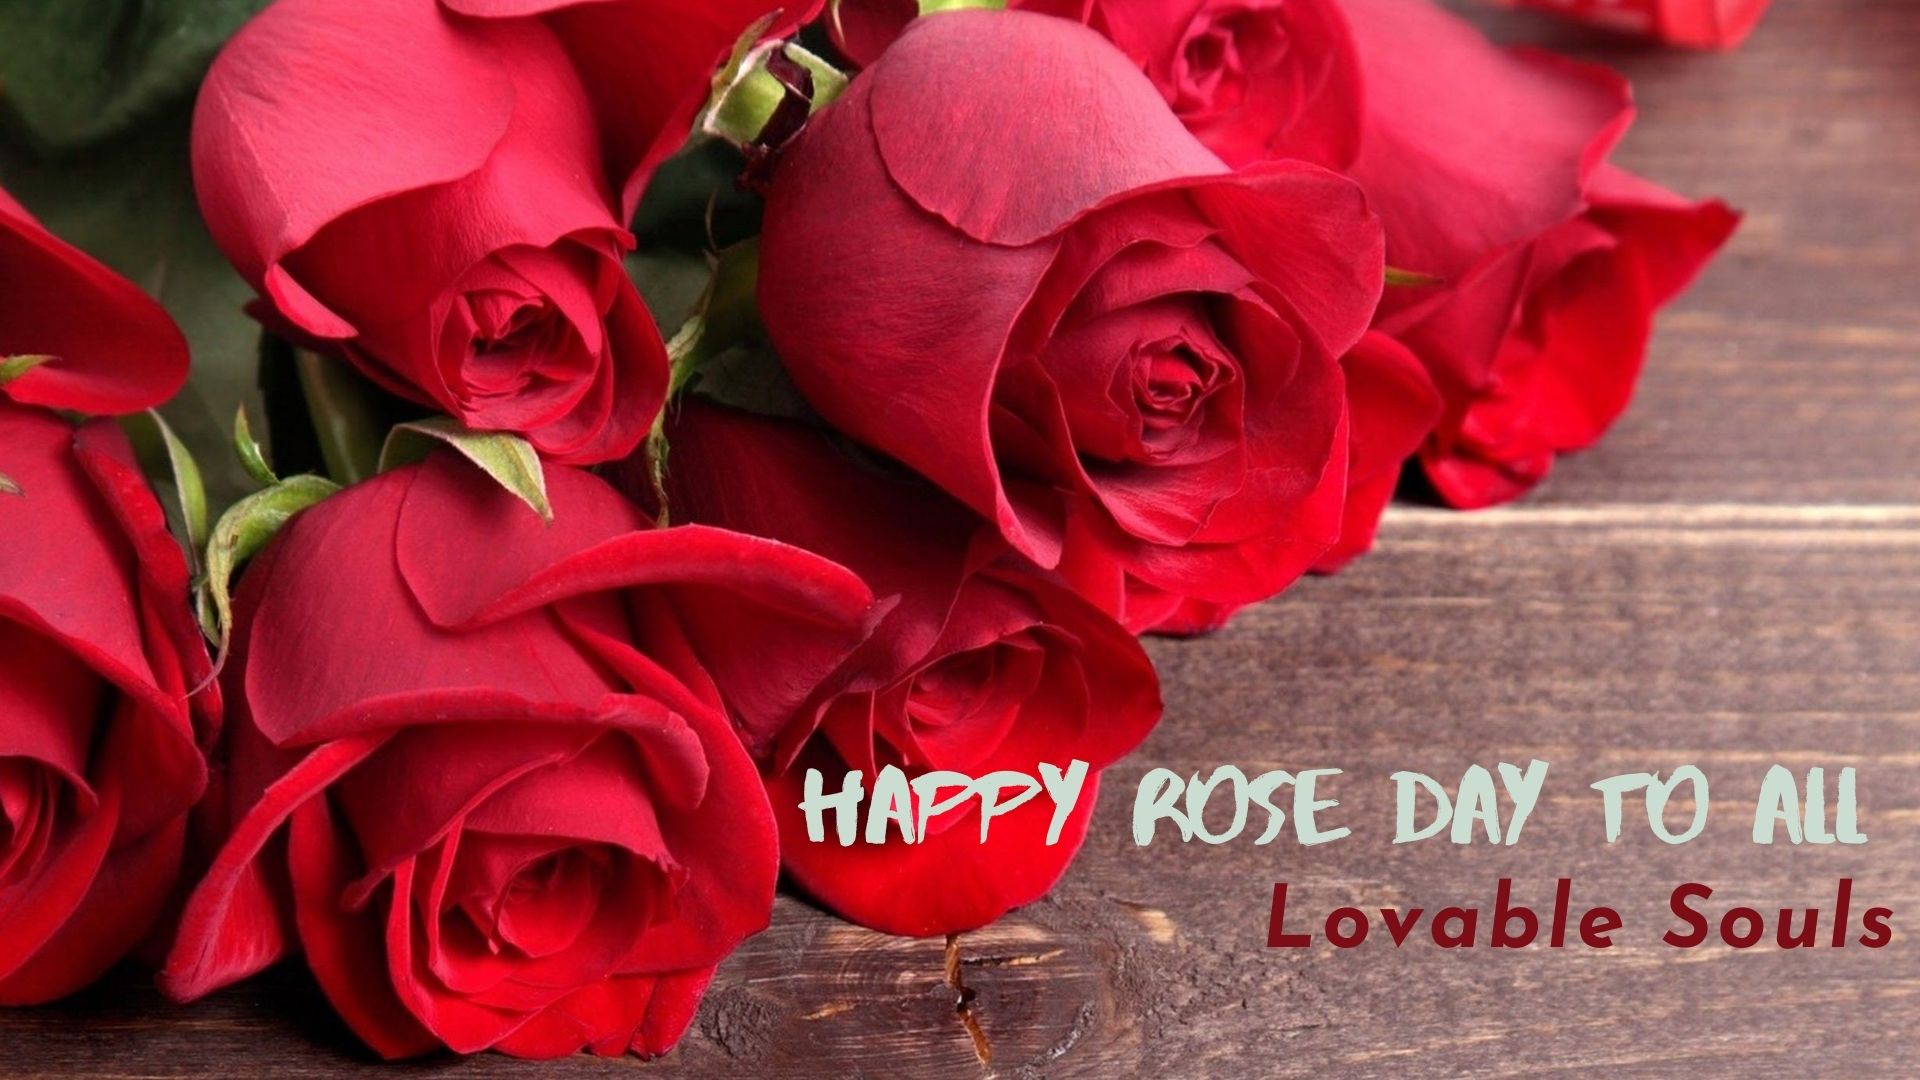 Happy Rose Day 2022: 50+ Rose Day Quotes, Wishes & Greetings